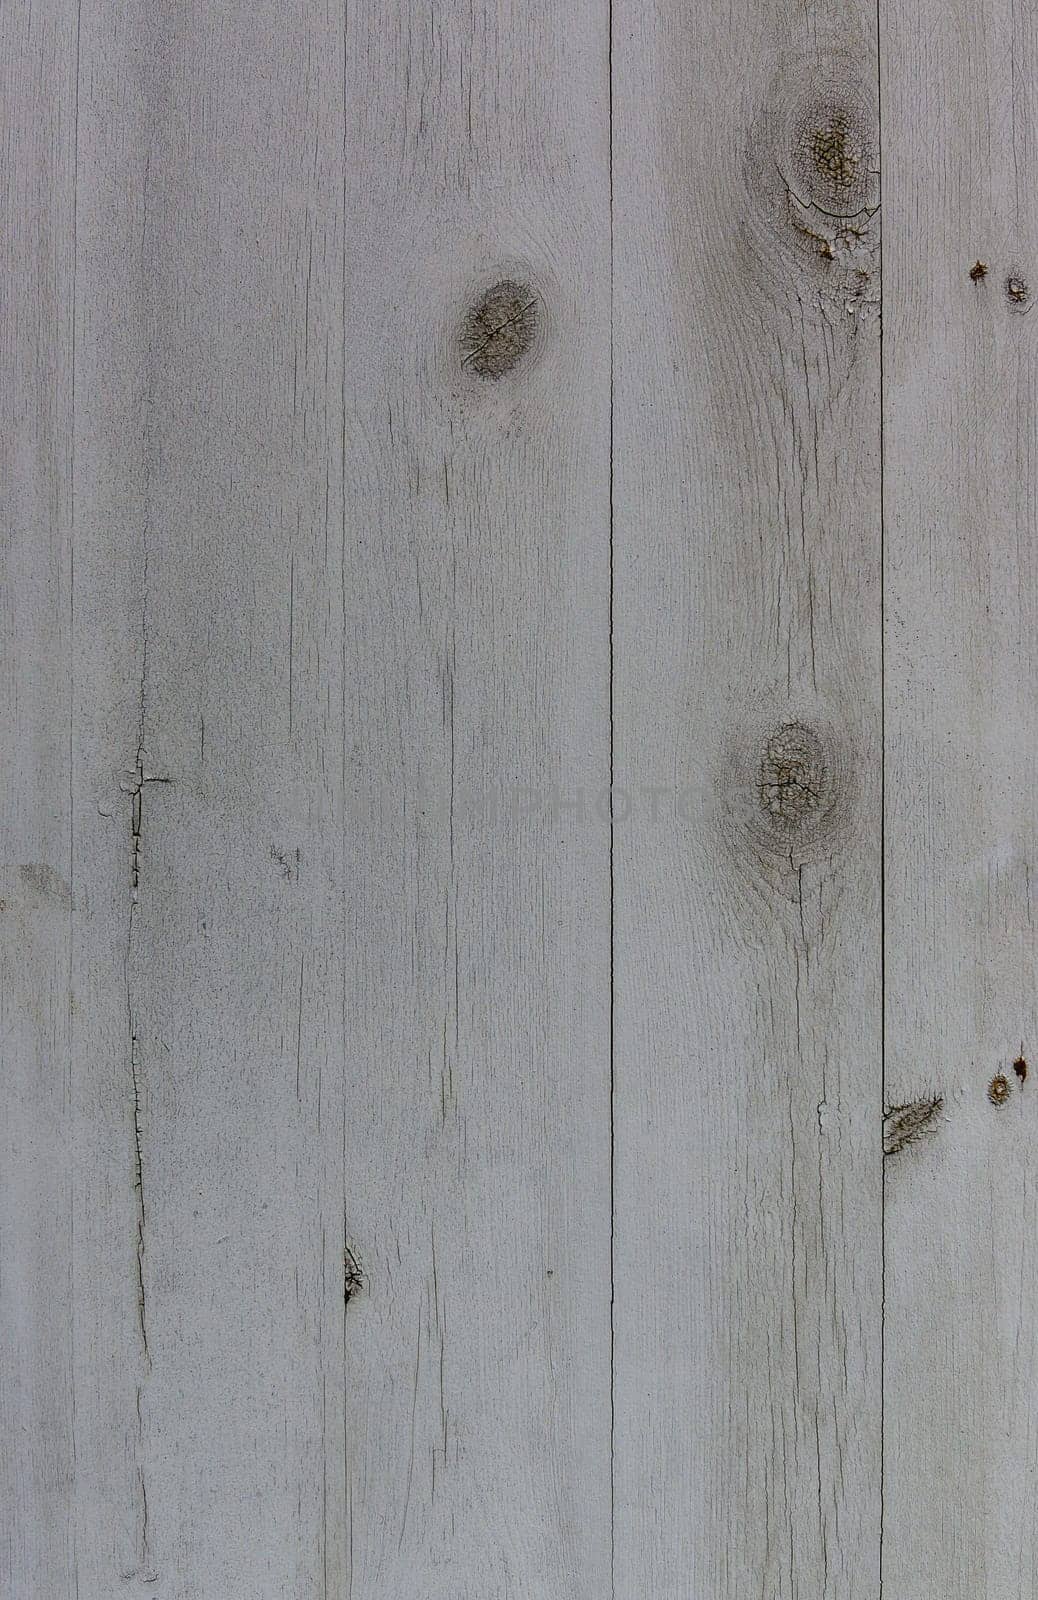 wooden wall, wood texture with natural patterns by Mixa74